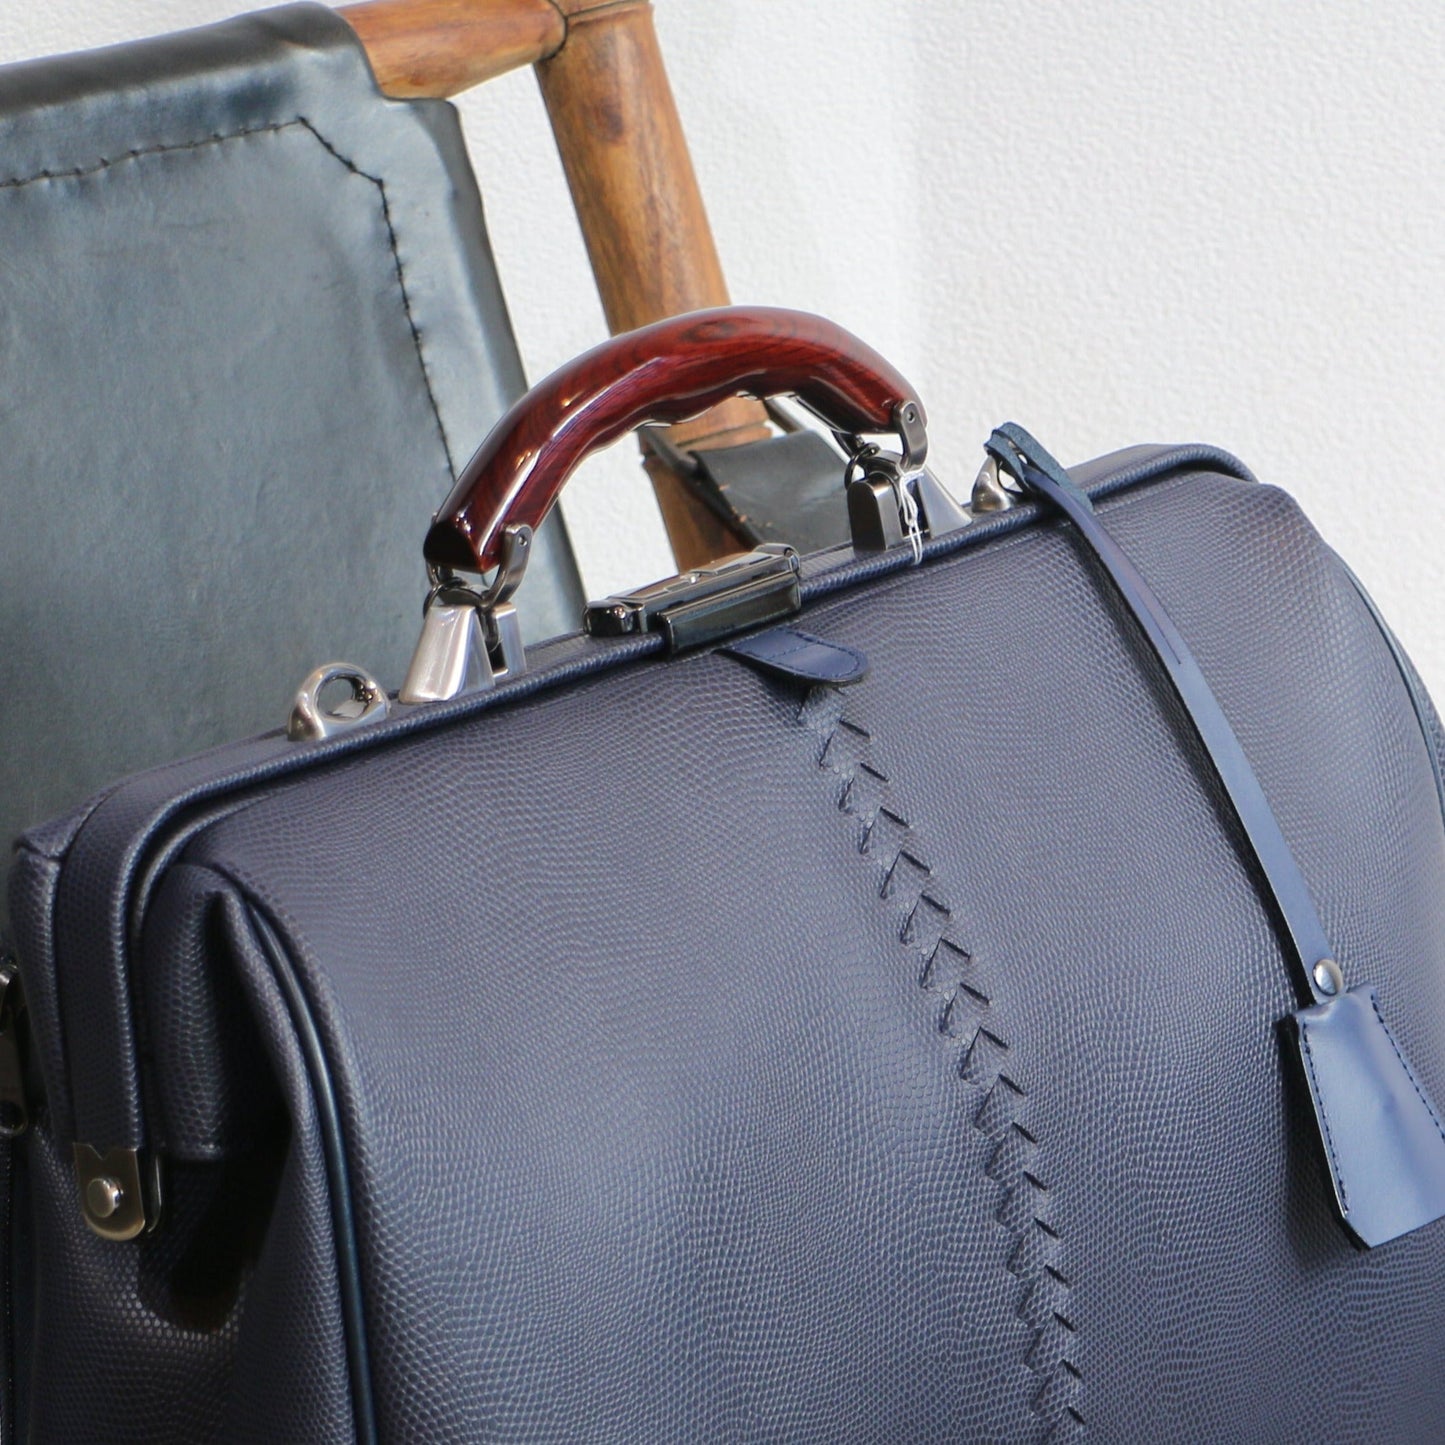 ◆Toyooka Bags Certified [Lacquer Painted Wooden Handle SET] Dulles Bag Toyooka Bags M Size YK3M [LIZARD] Navy